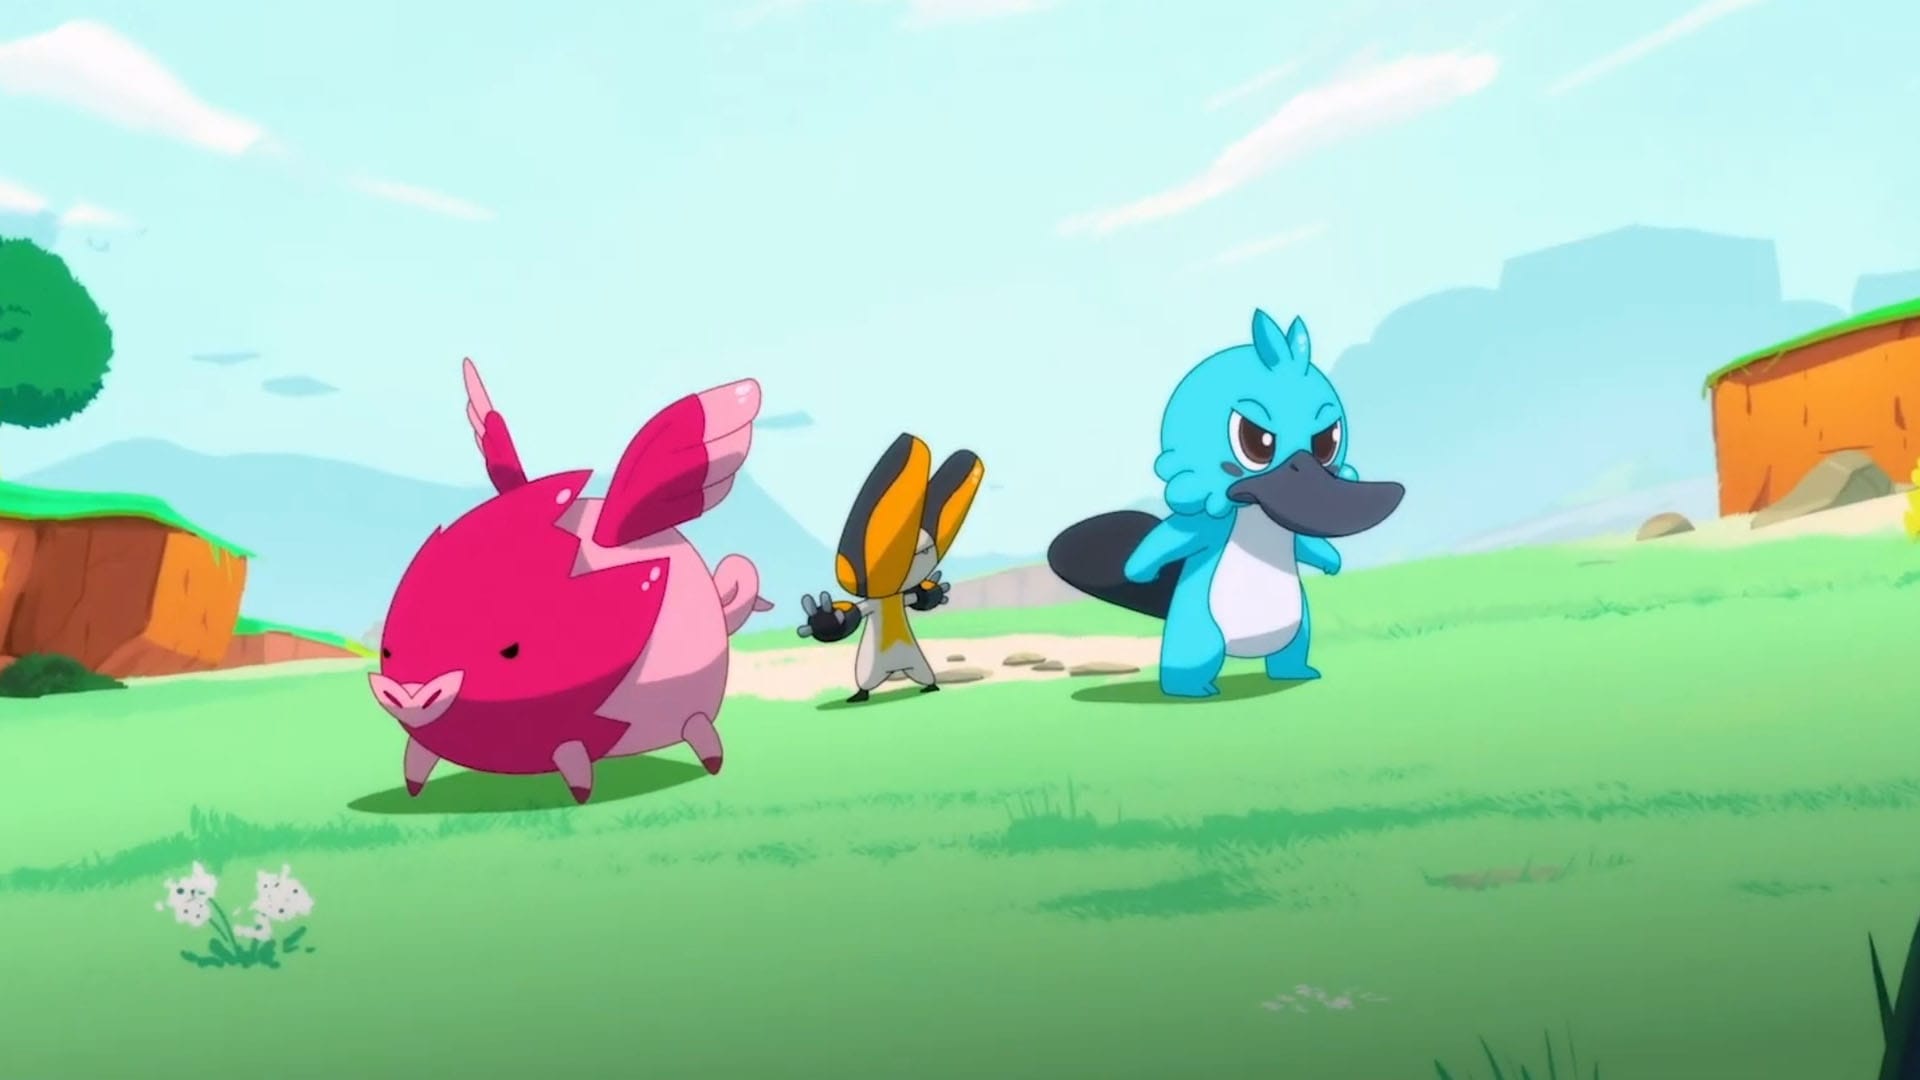 Temtem: Swarm Announced, Mashing Together Pokemon-Like Creatures and Survivors-Style Gameplay